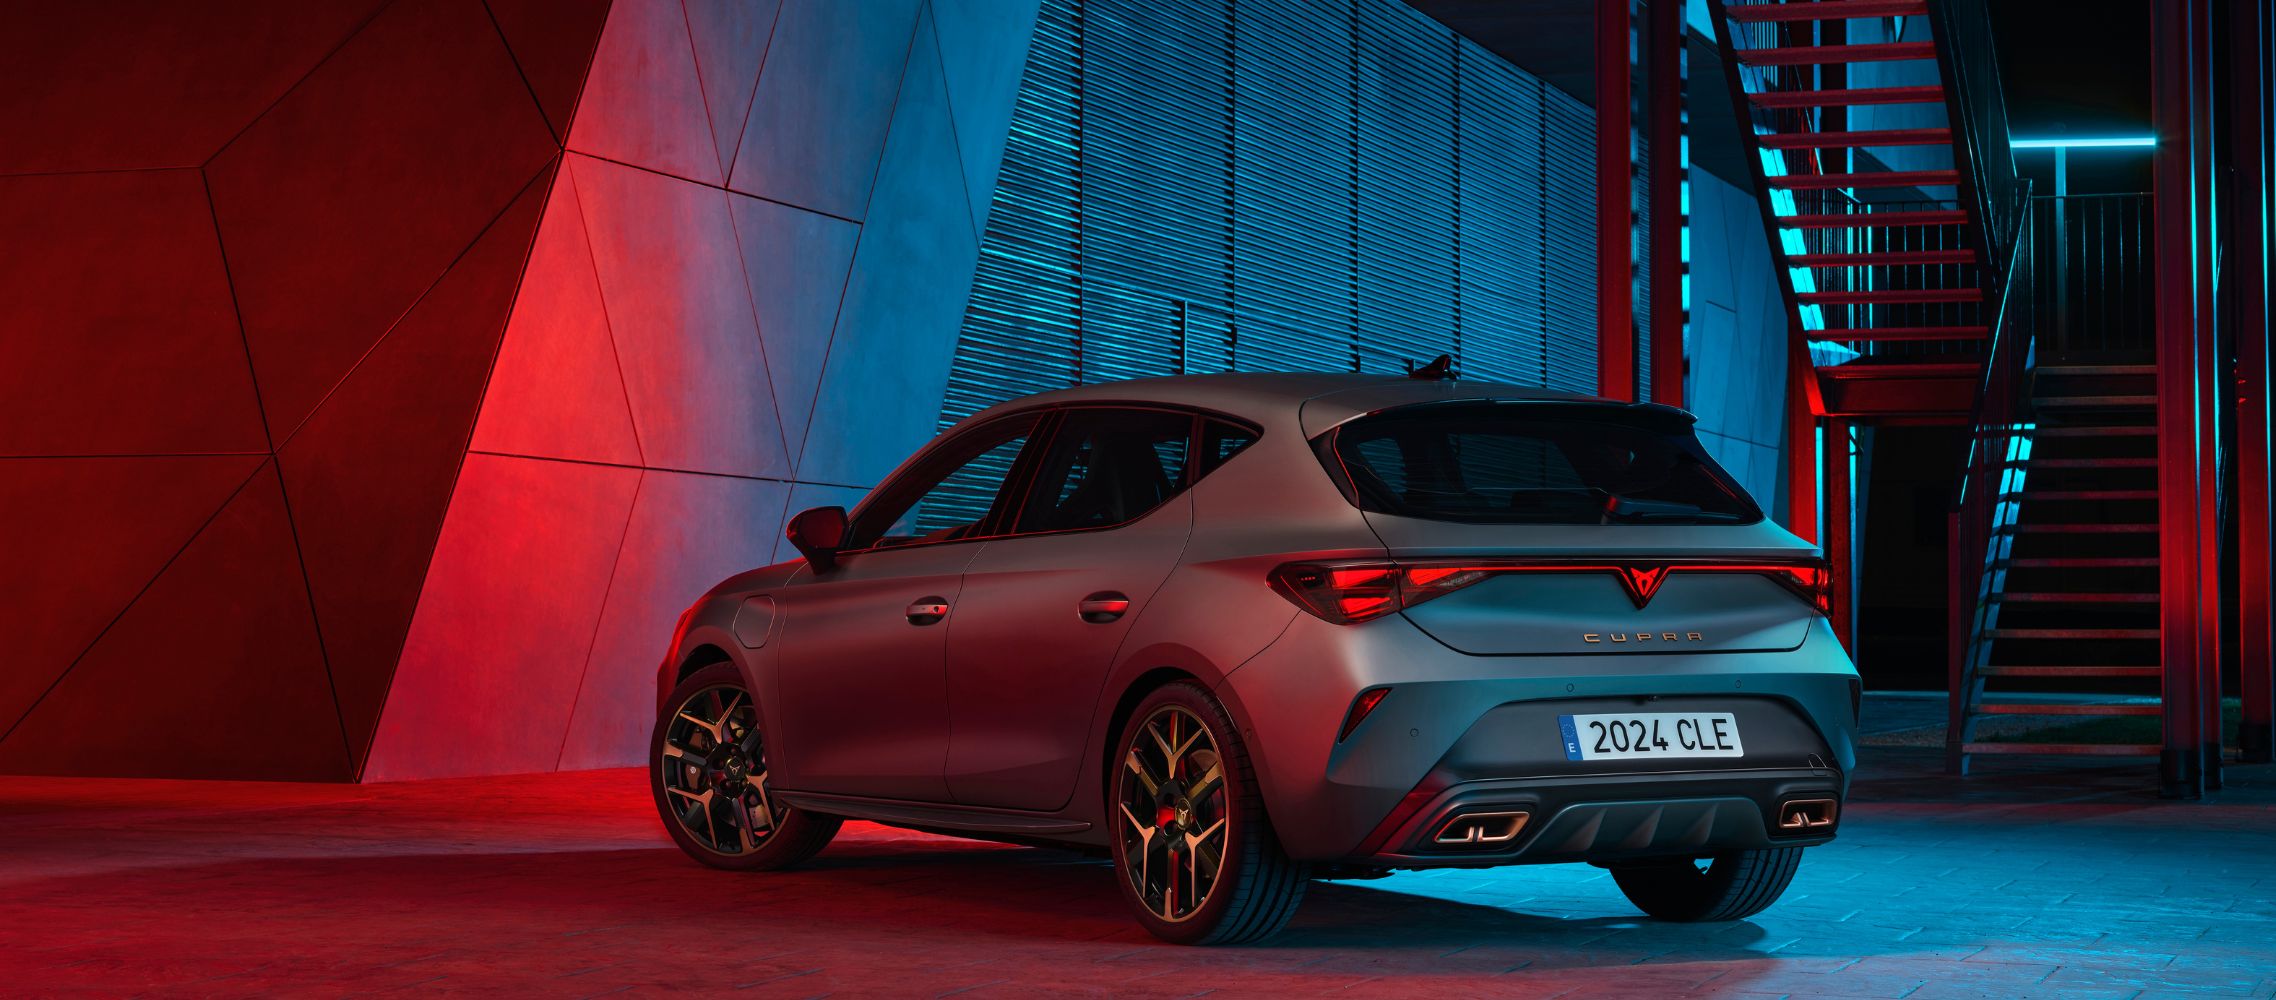 side view of a new 2024 cupra leon's red rear light, highlighting the sleek lines and lighting design against a dark background.​